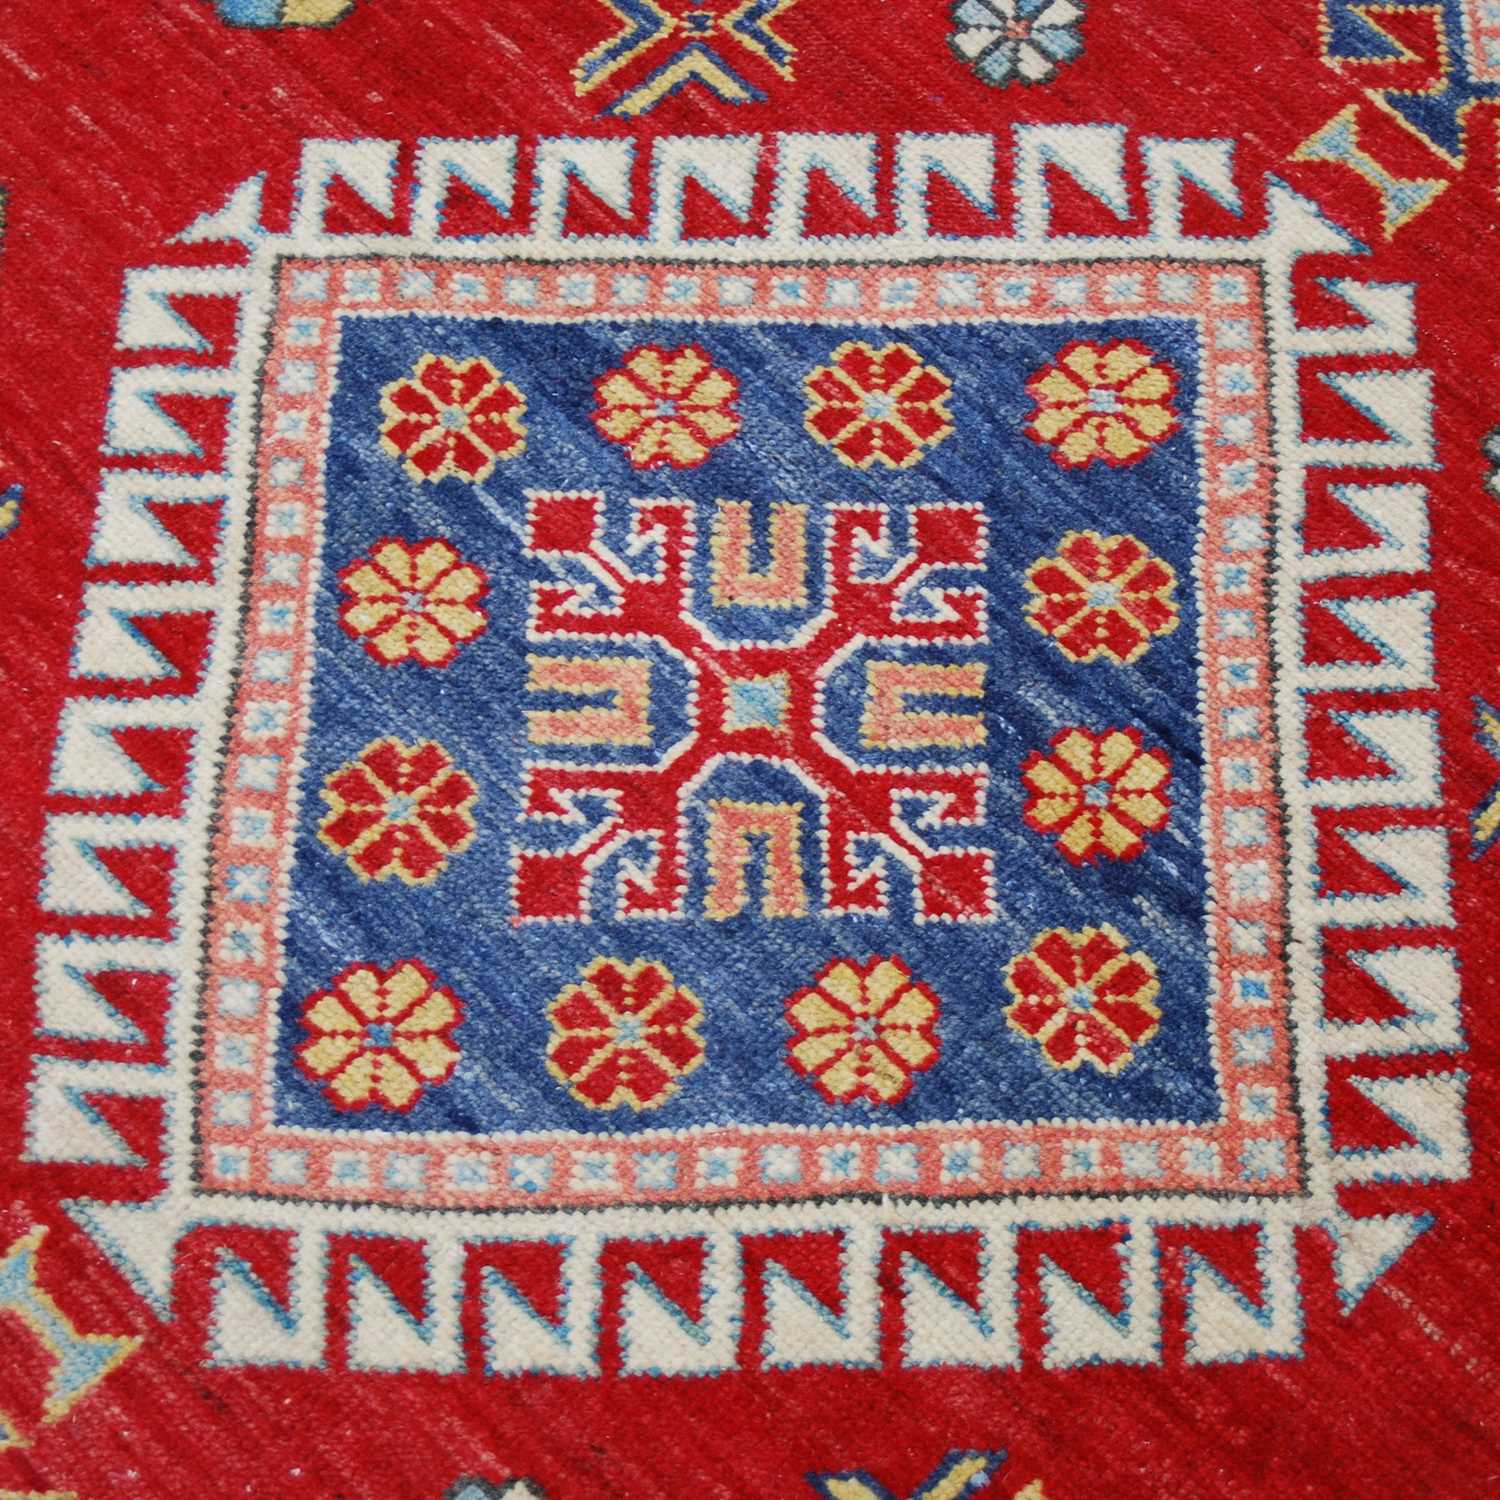 An Afghan Kazak rug, 20th century, the rectangular madder ground centred with a large blue ground - Image 4 of 5